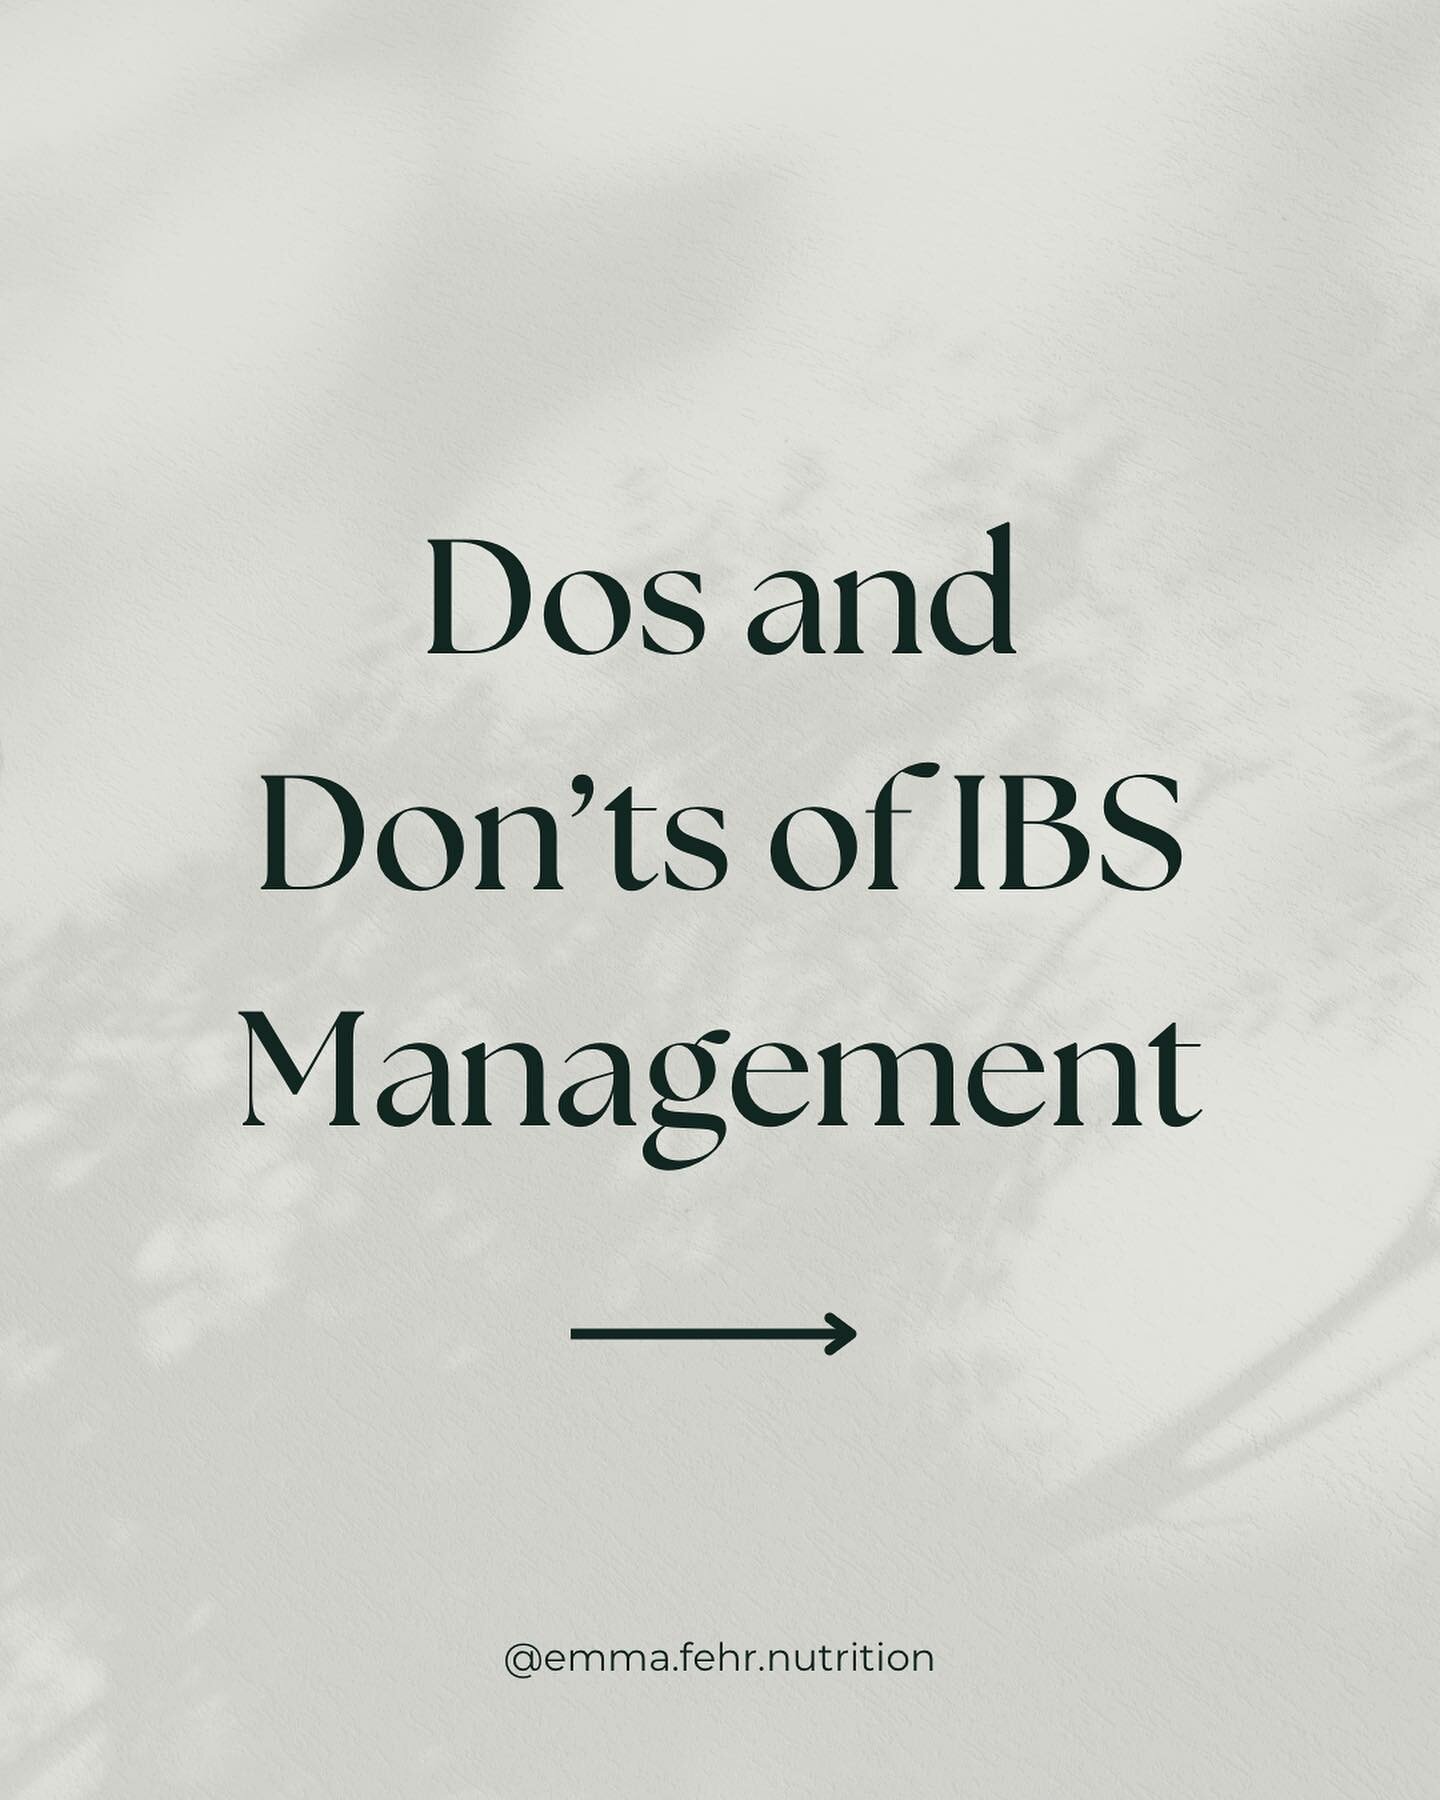 When it comes to managing IBS make sure you have a credible professionals helping you!

Treatment options are complex and symptoms of IBS are also similar to more serious GI disorders. 

ALWAYS get checked out by a Gastroenterologist first to determi